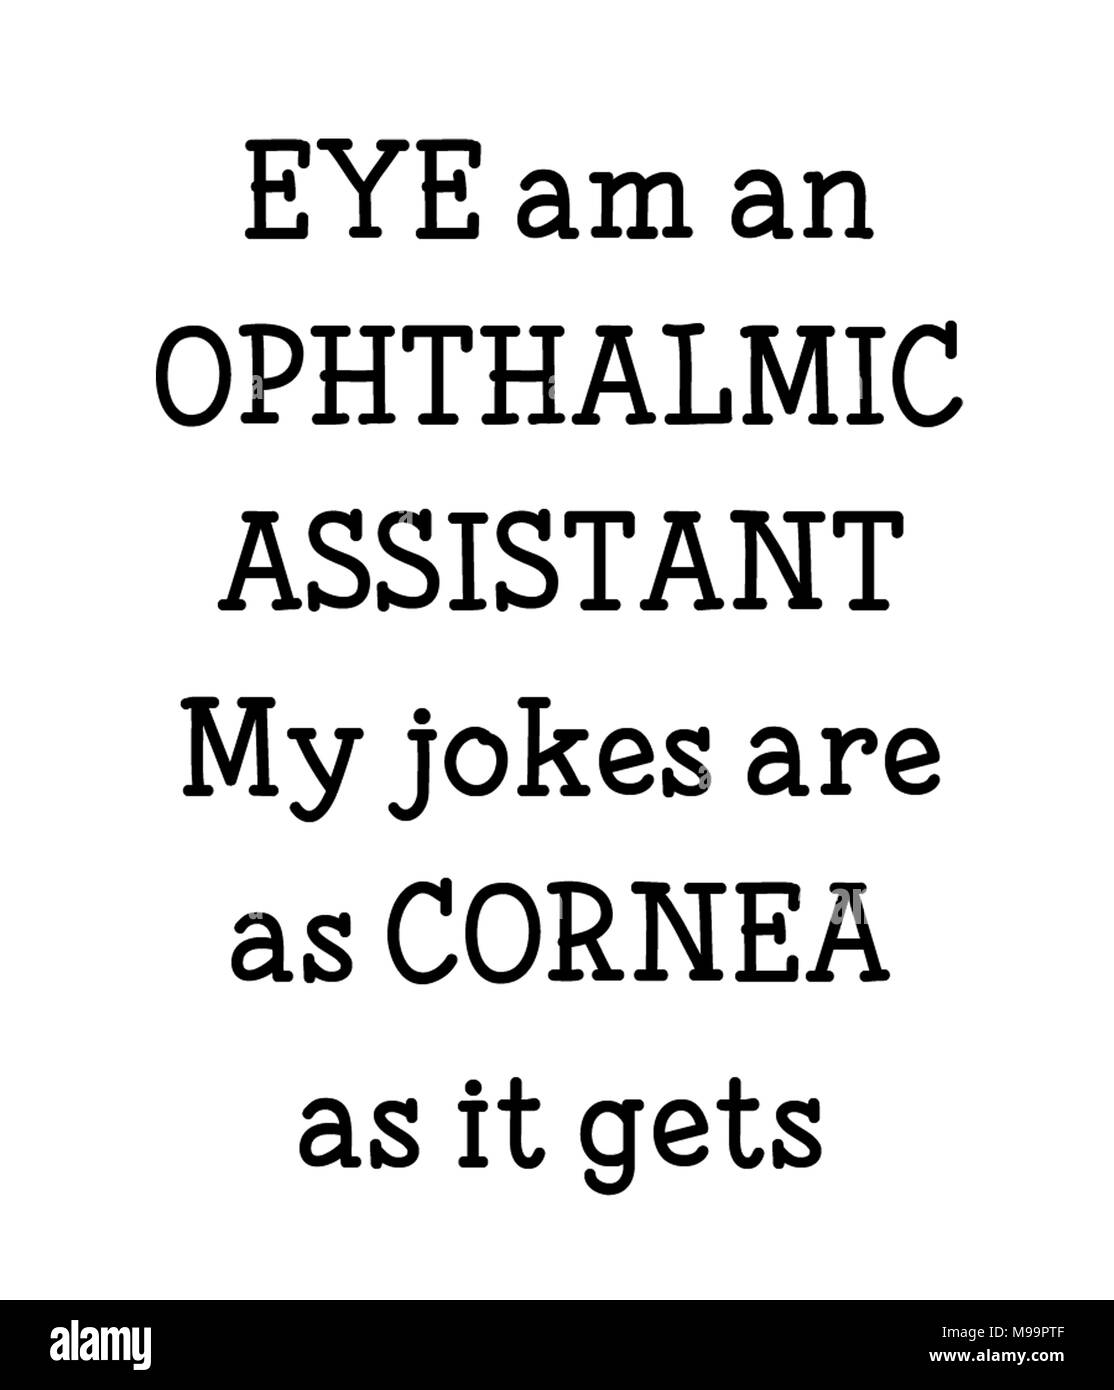 EYE am an OPHTHALMIC ASSISTANT My jokes are as CORNEA as it gets Stock Photo